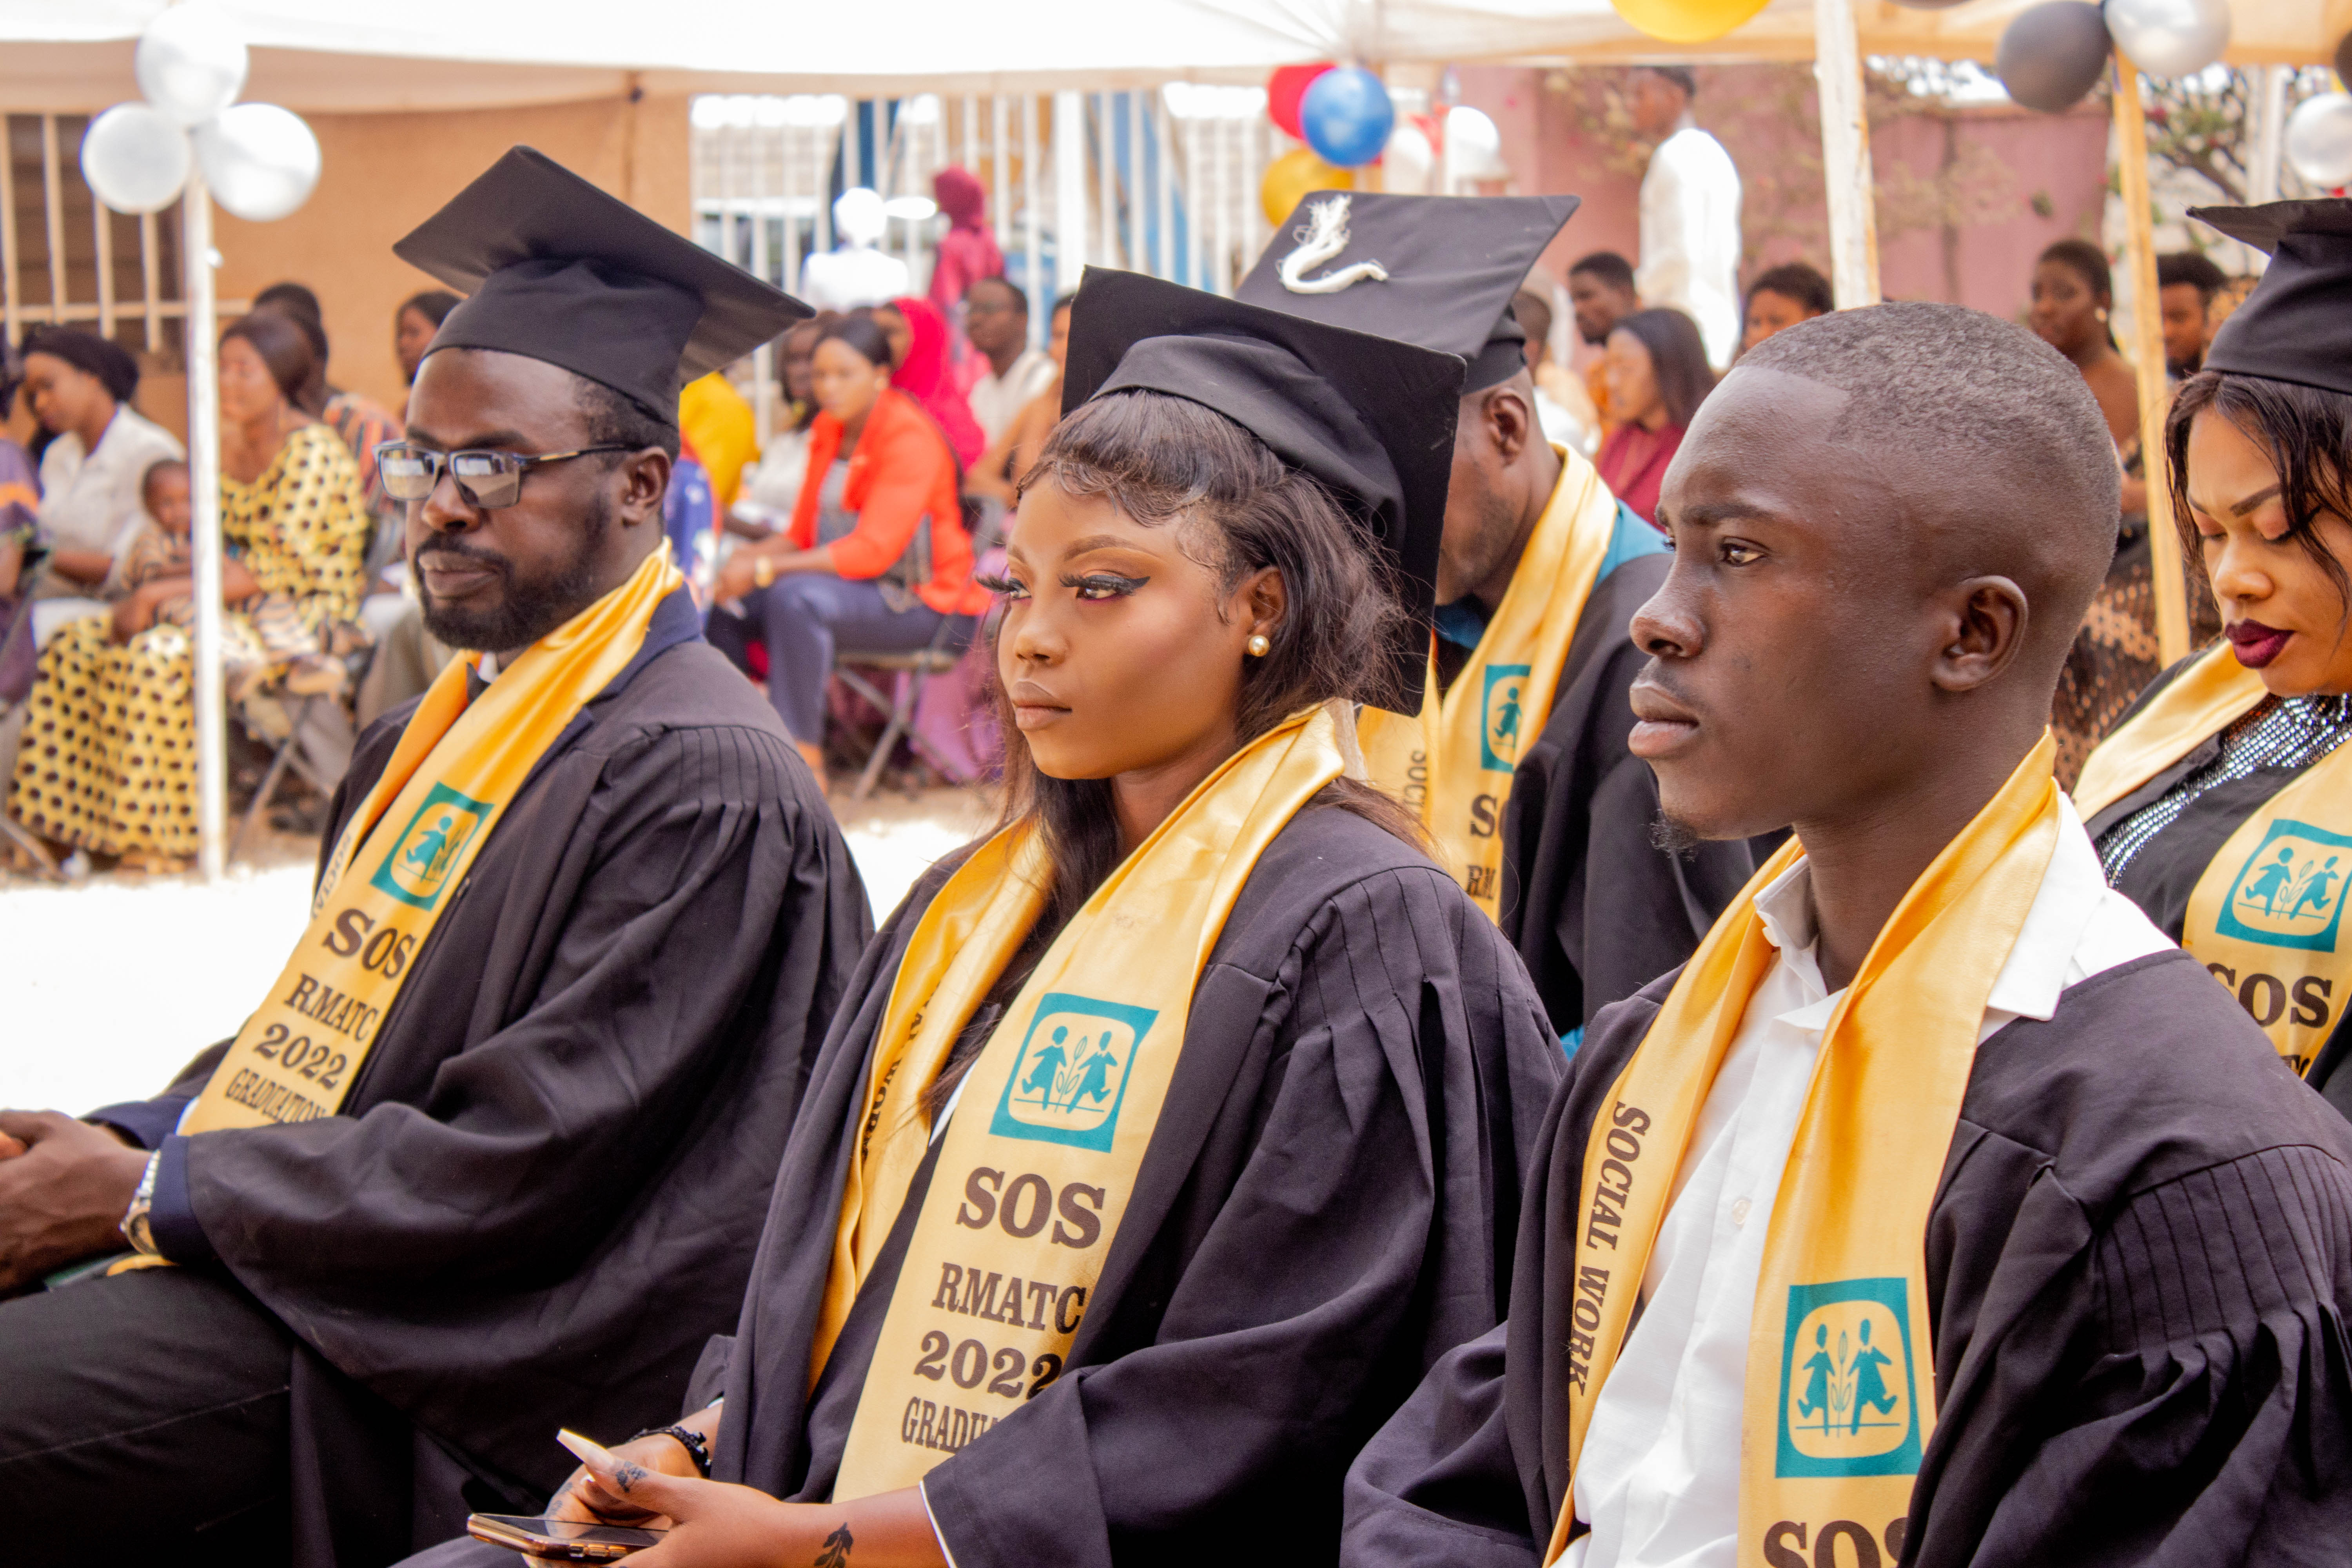 60 graduates in Social work, Literacy, Catering , Craft and Sewing